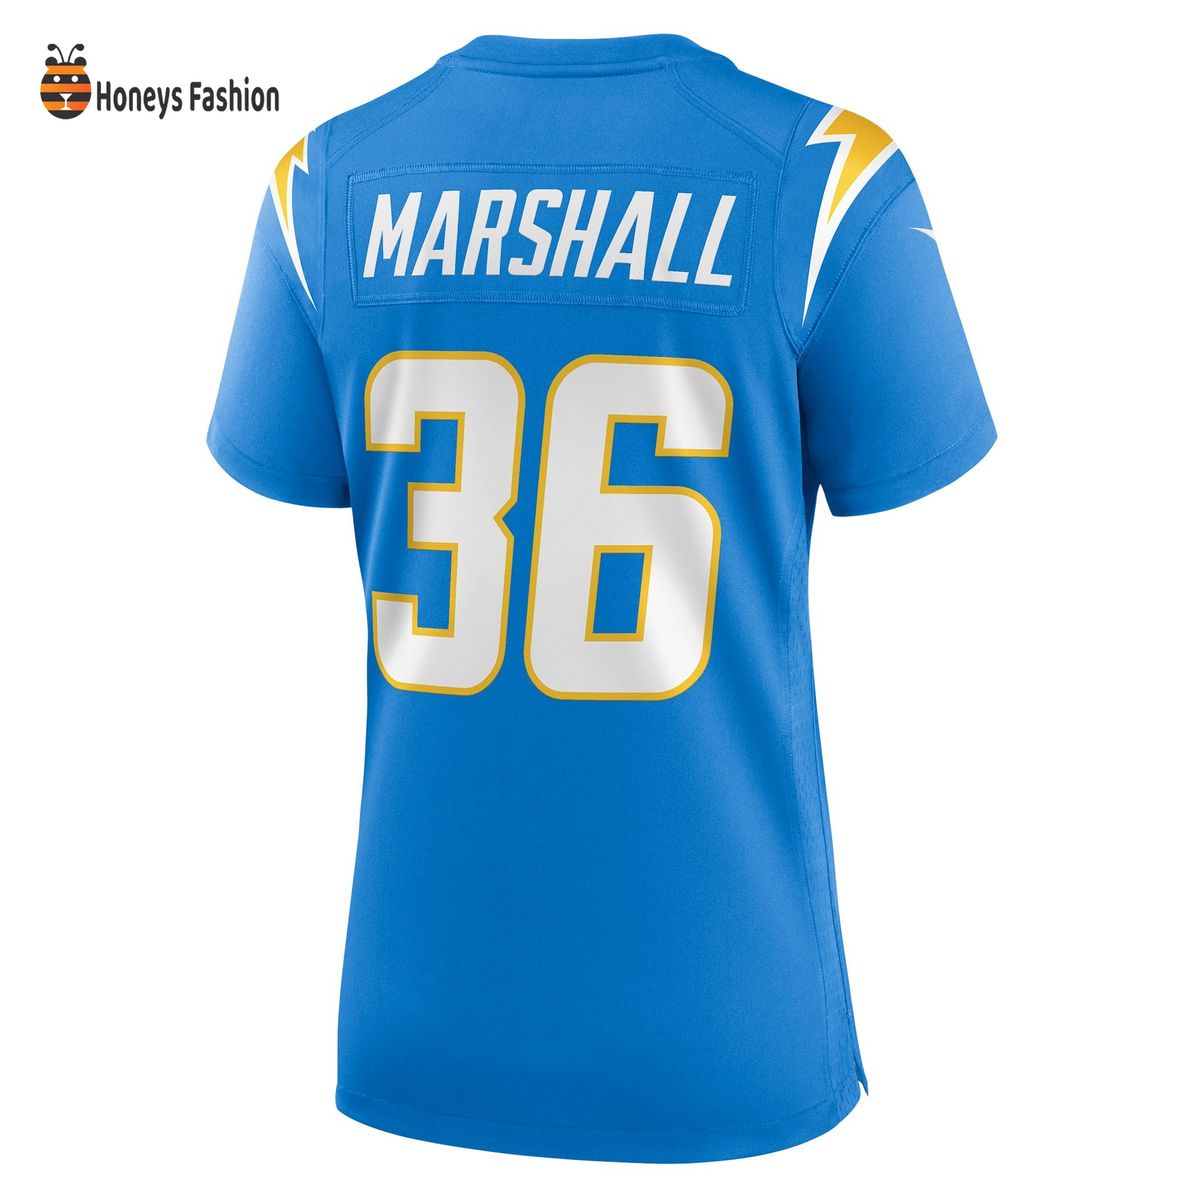 Trey Marshall Los Angeles Chargers Nike Women’s Game Jersey